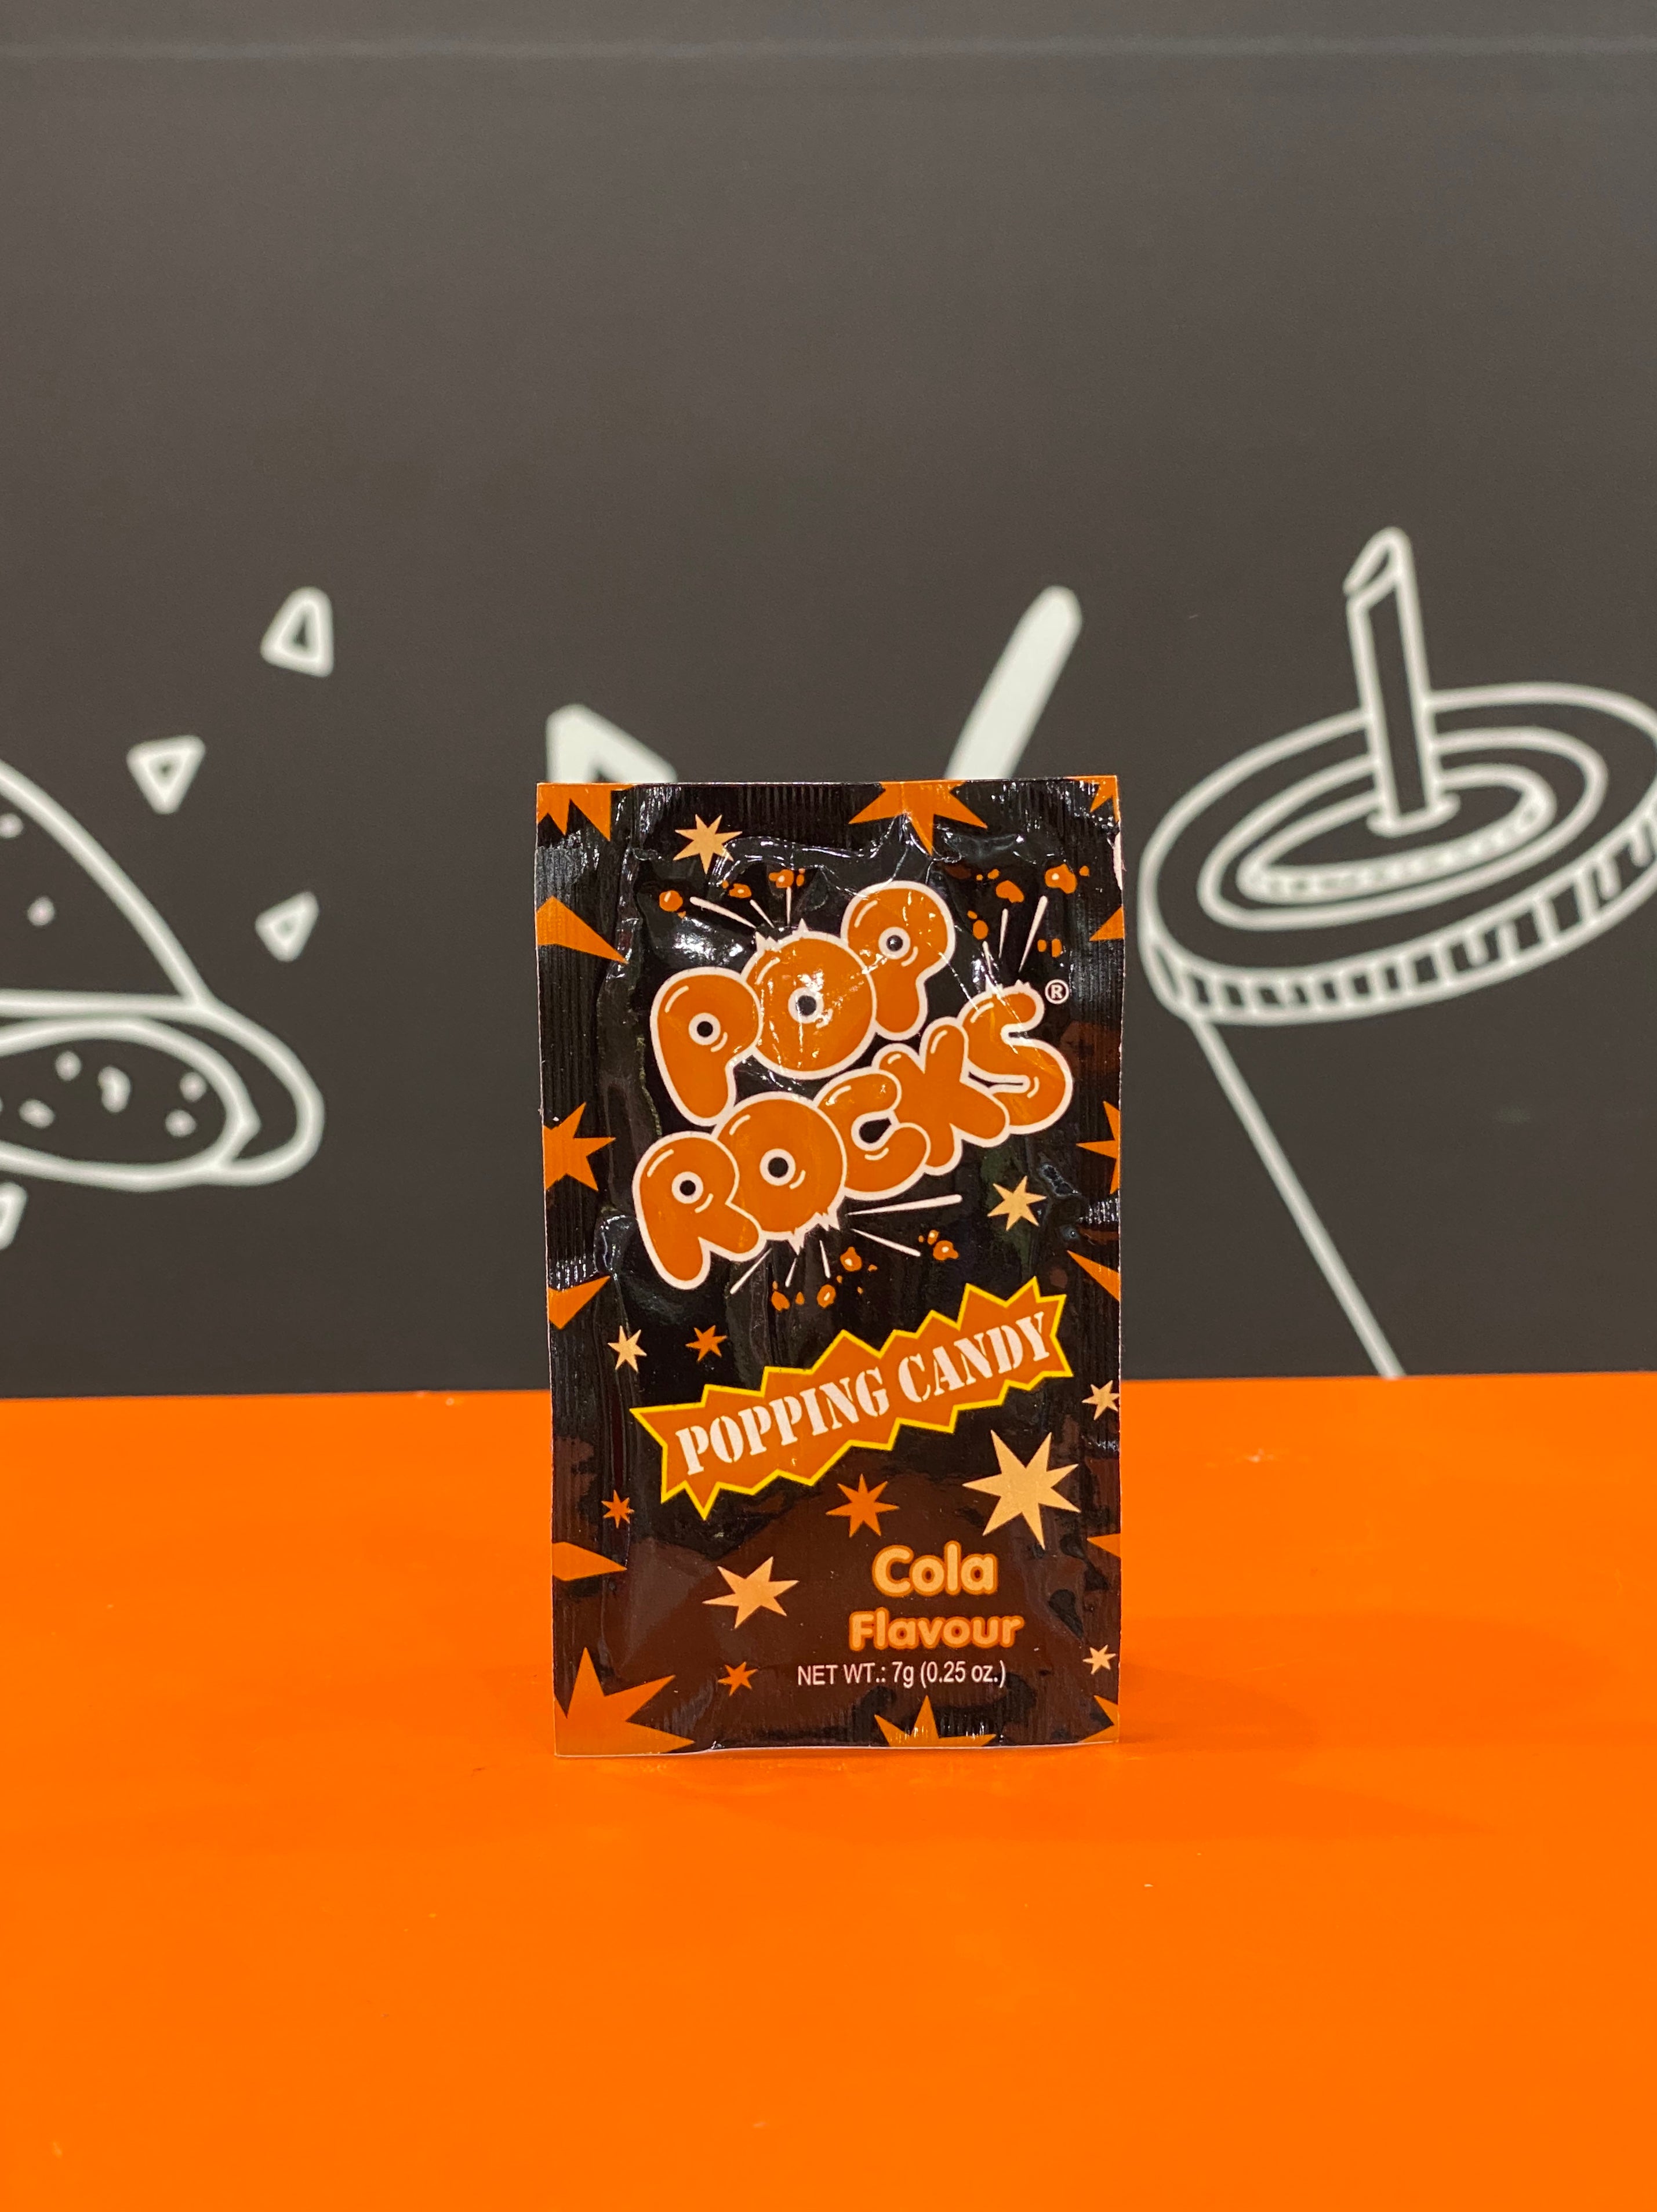 Pop Rocks Popping Candy Cola